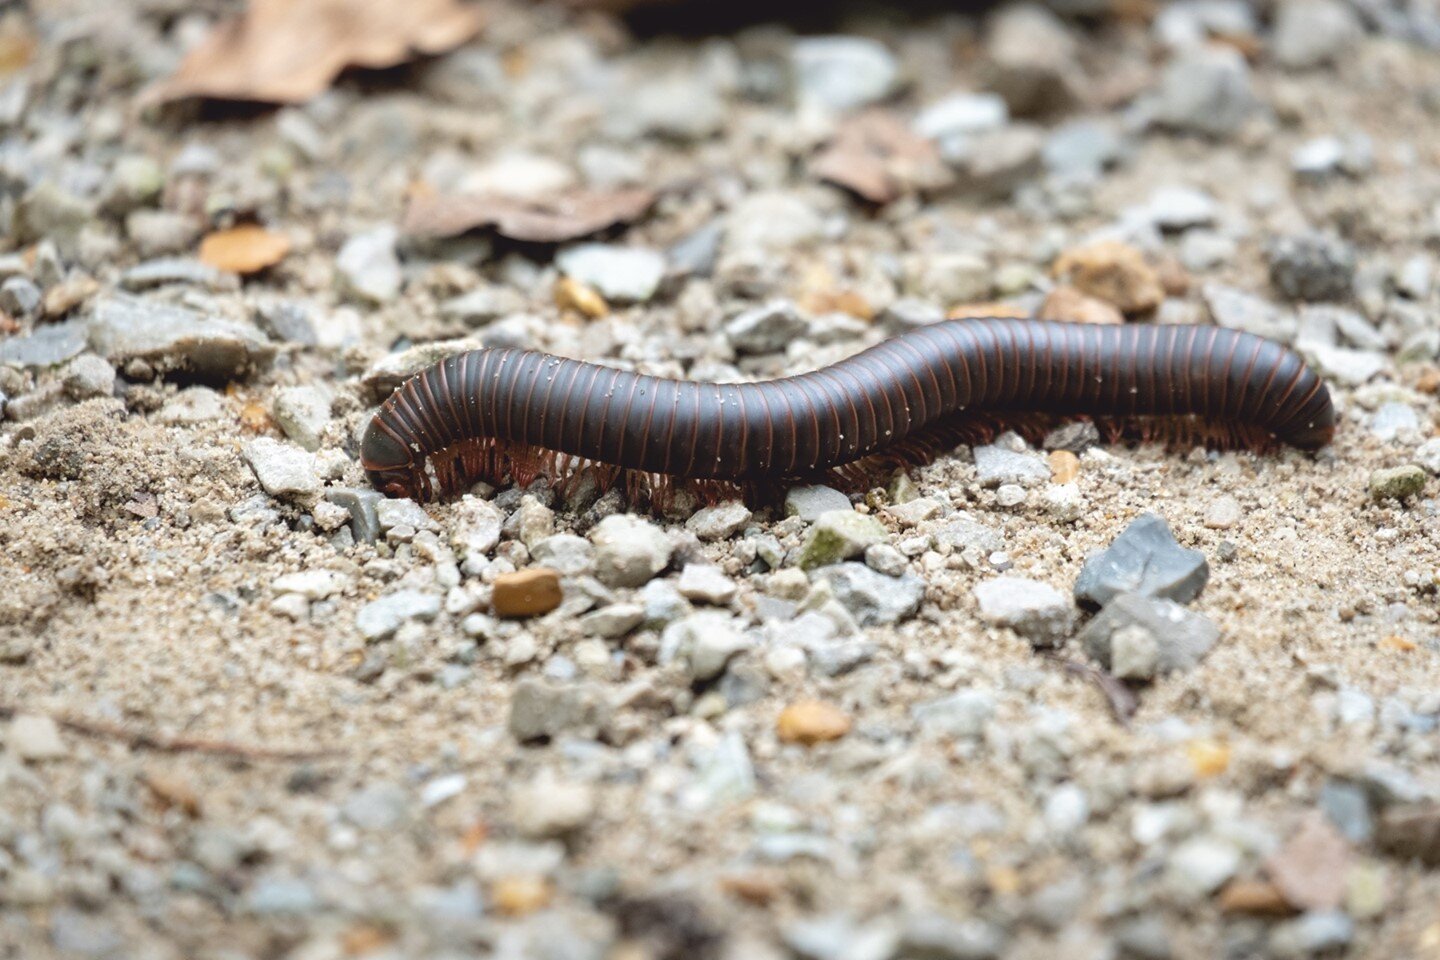 Millipede (Diplopoda) 🤎
&bull;&bull;&bull;&bull;
&ldquo;If we can teach people about wildlife, they will be touched. Share my wildlife with me. Because humans want to save things that they love.&rdquo; ― Steve Irwin
.
🦊Welcome to our #wildlife_loop